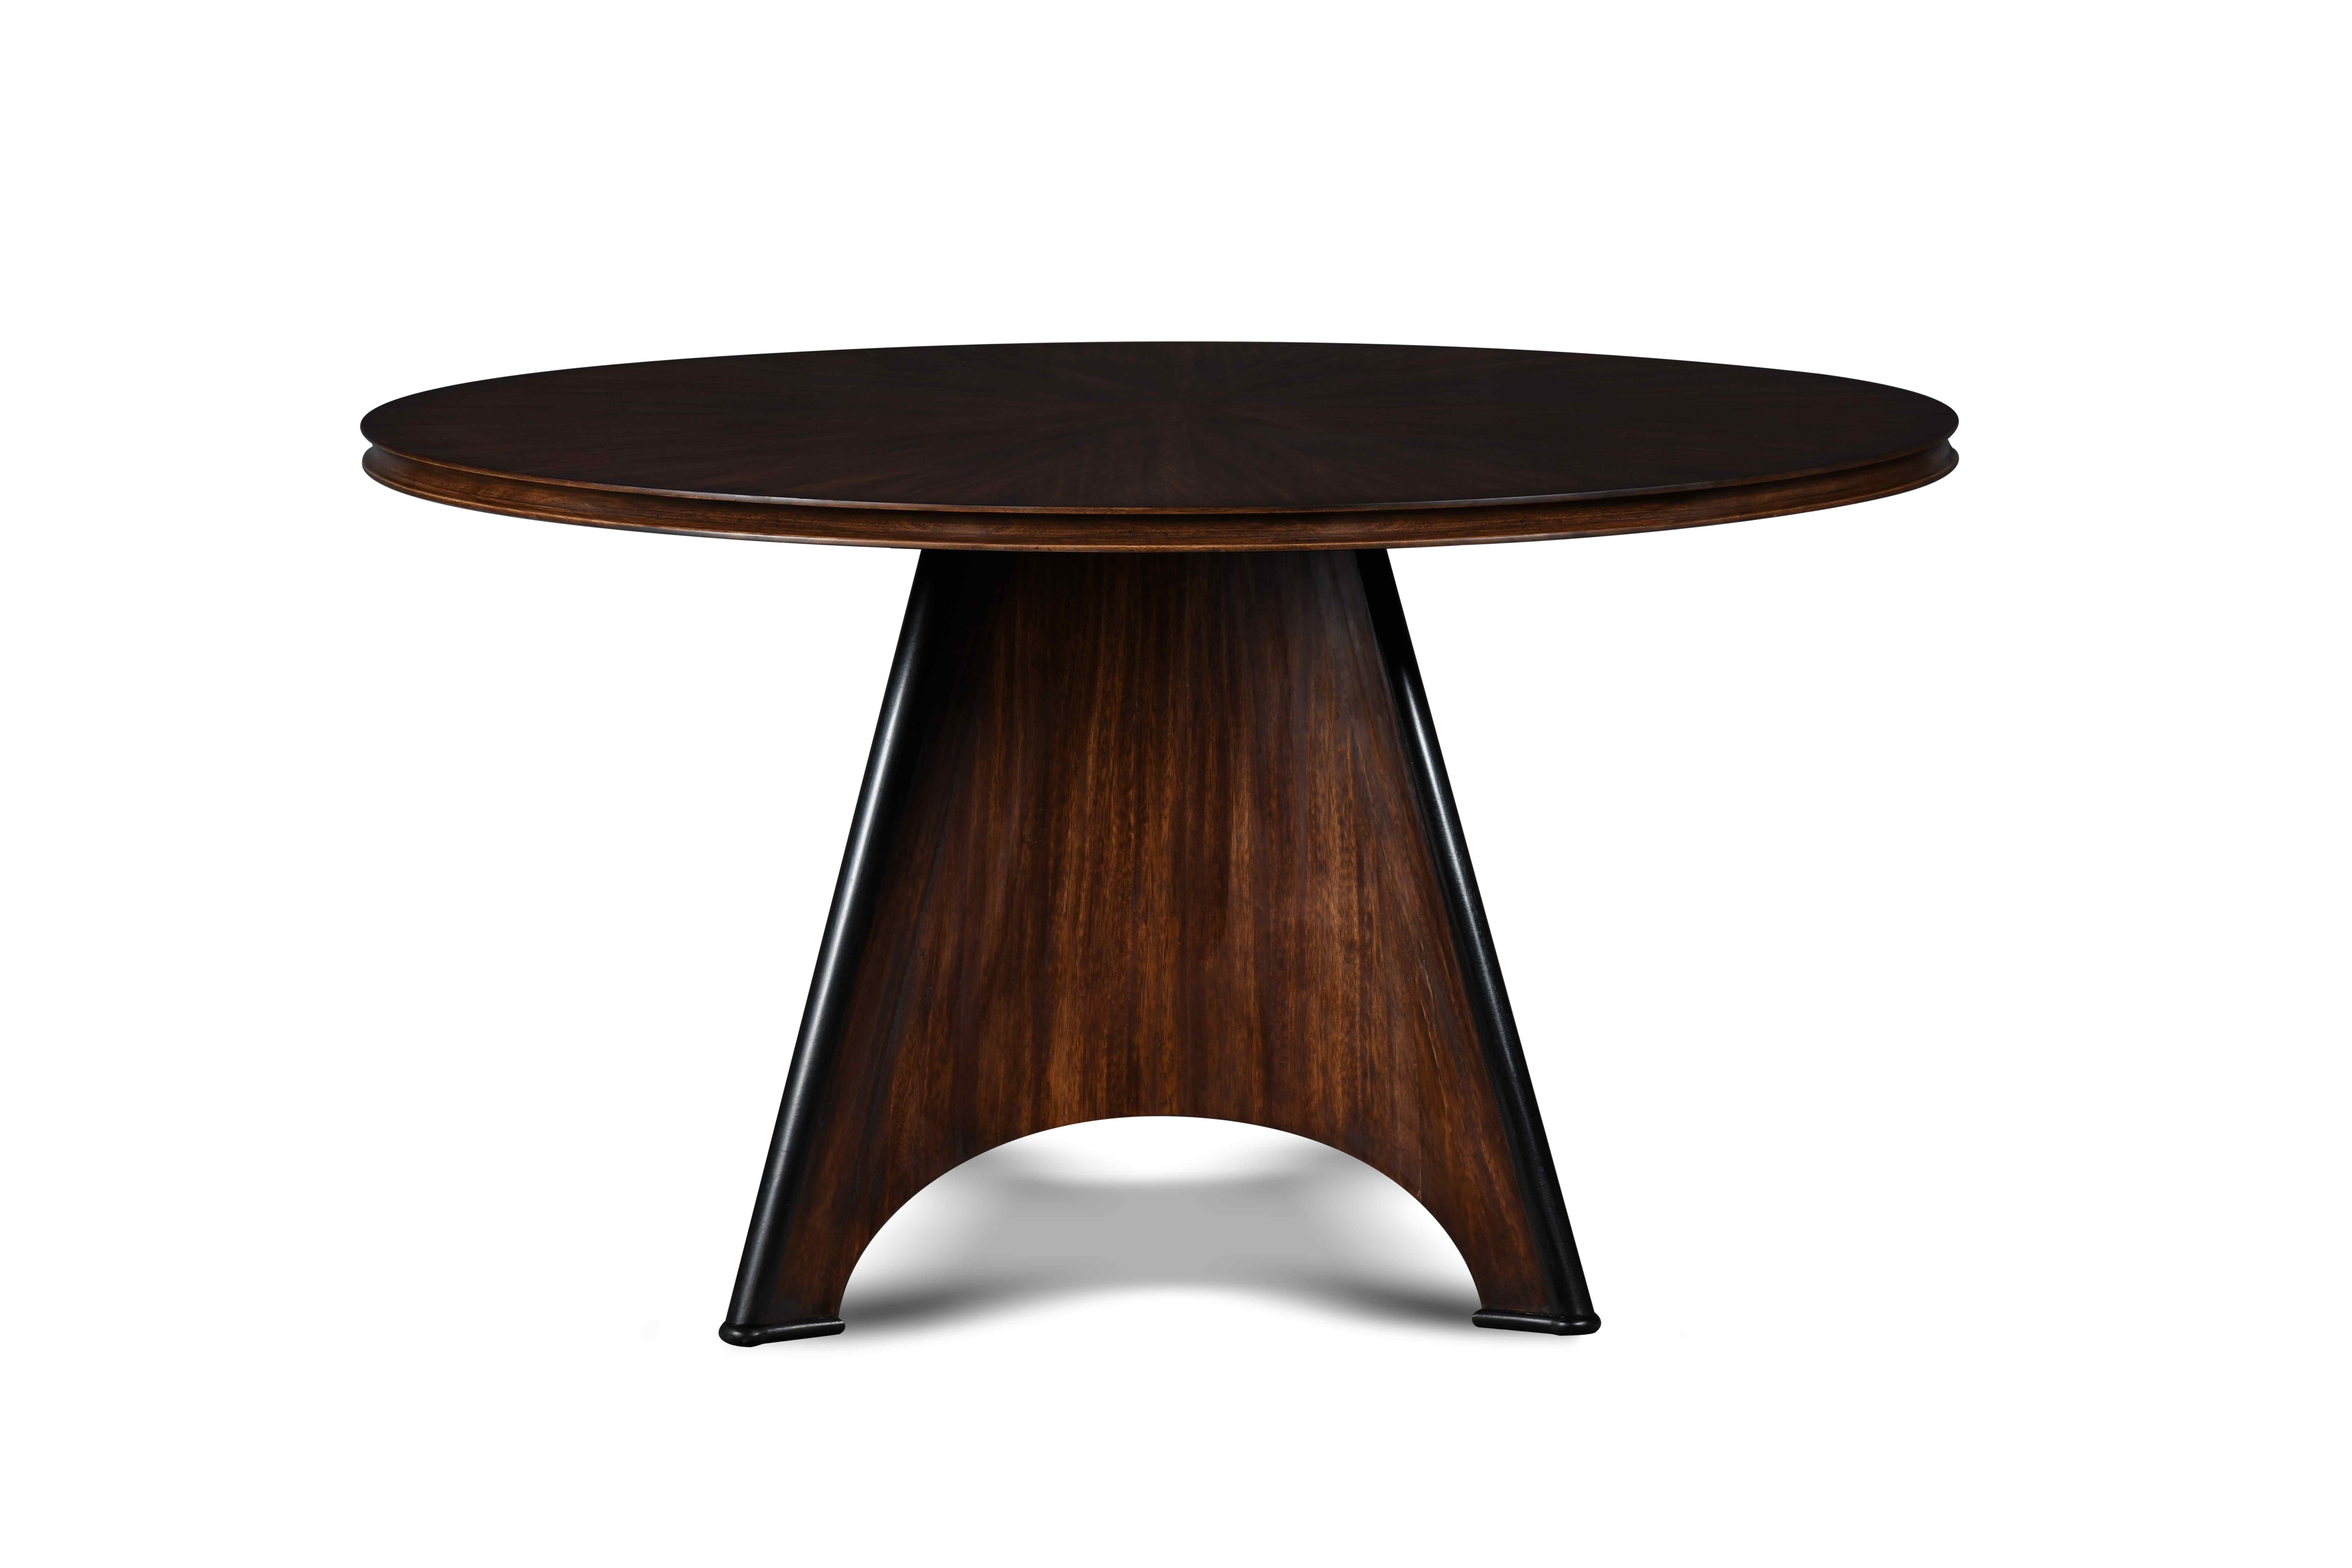 This center table creates a visual feast with a pyramid-like base and its curved and concave sides. The table’s edge has an inward molding that adds an elegant depth to the piece.